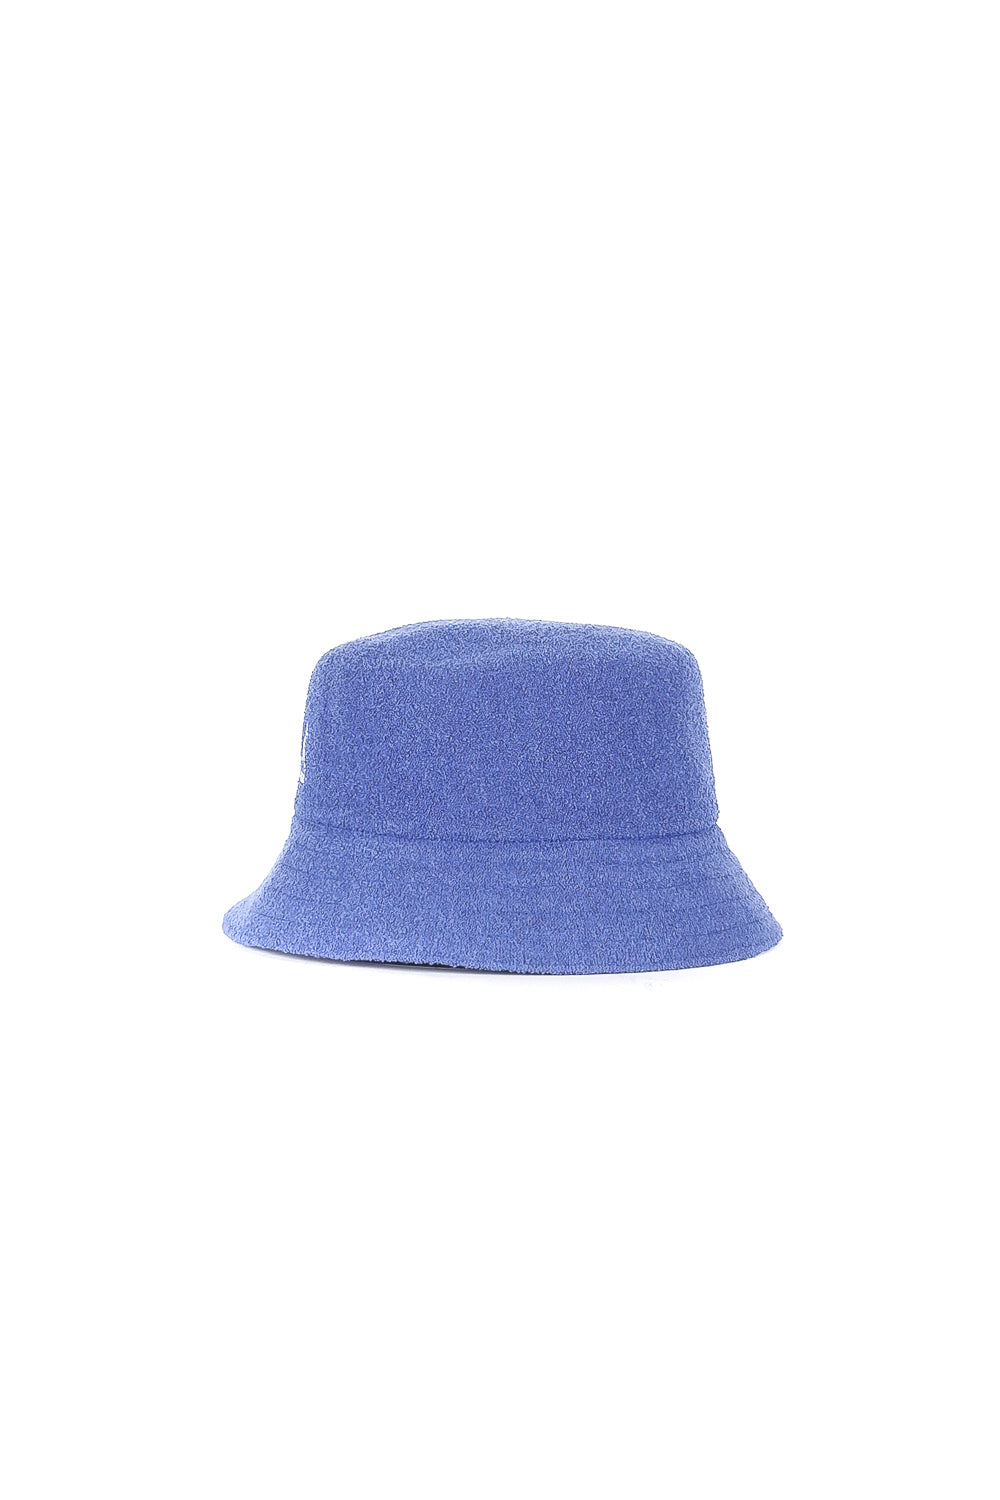 Buy the Kangol Bermuda Bucket Hat Starry Blue at Intro. Spend £50 for free UK delivery. Official stockists. We ship worldwide.